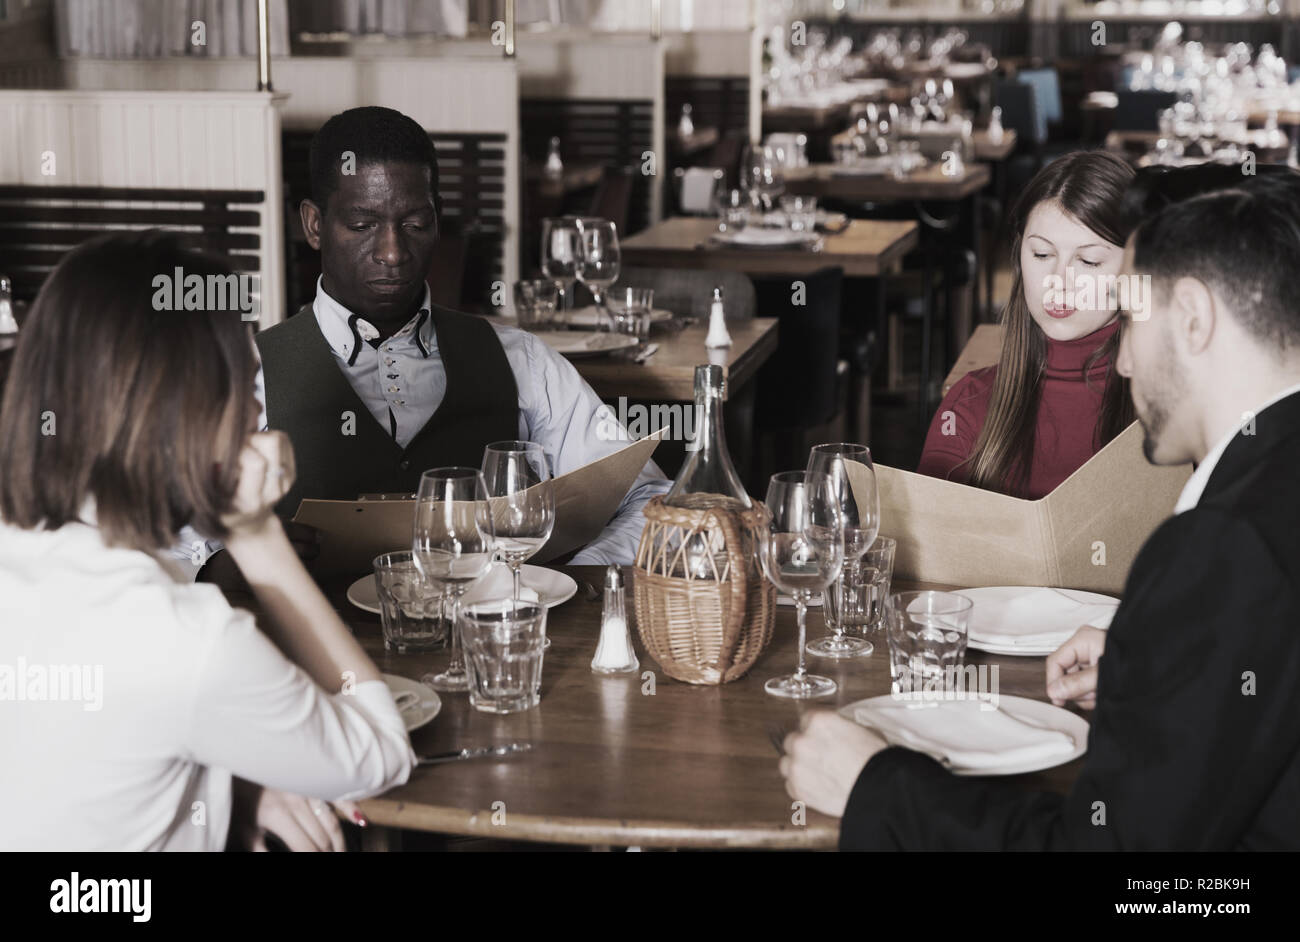 Group of young people sitting at table in cozy restaurant, choosing dishes from menu Stock Photo